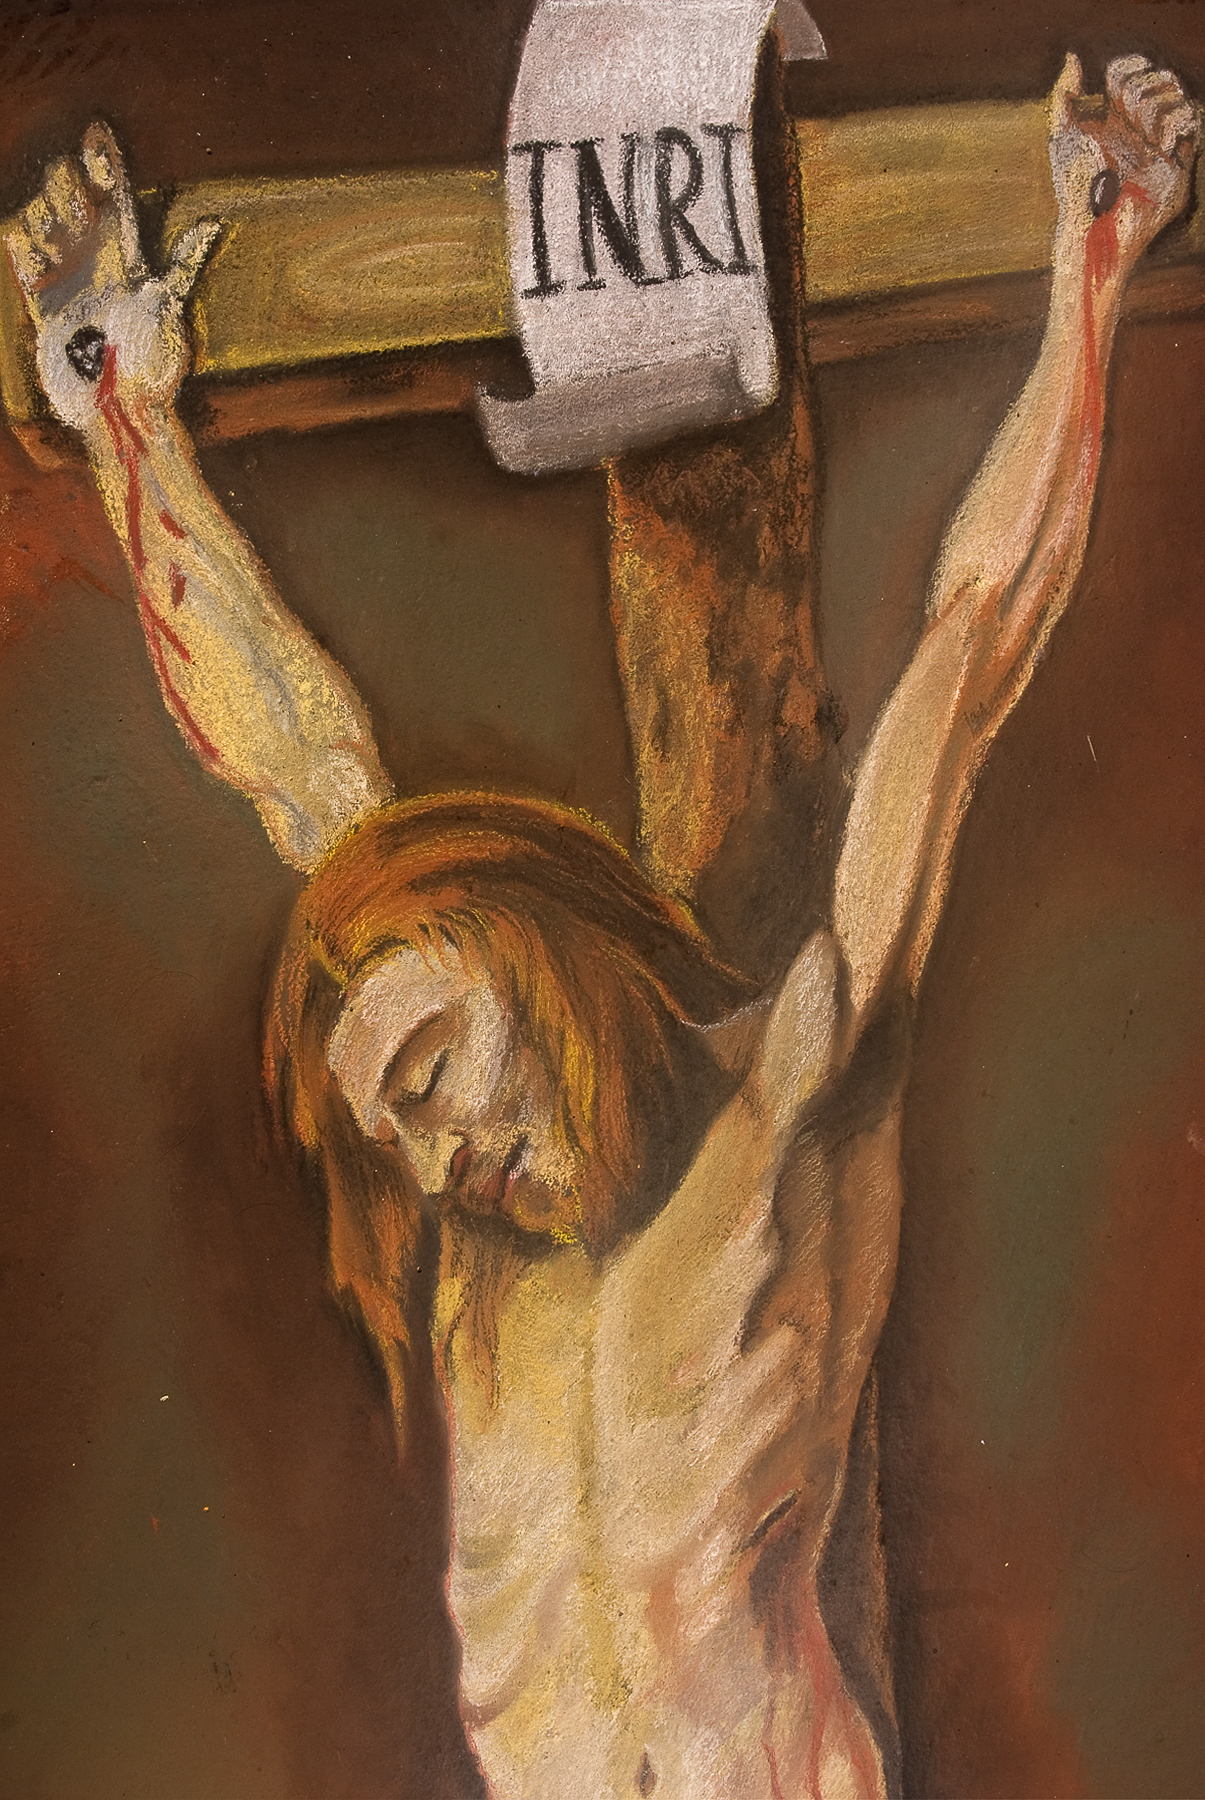 there is a painting of a man holding up a cross